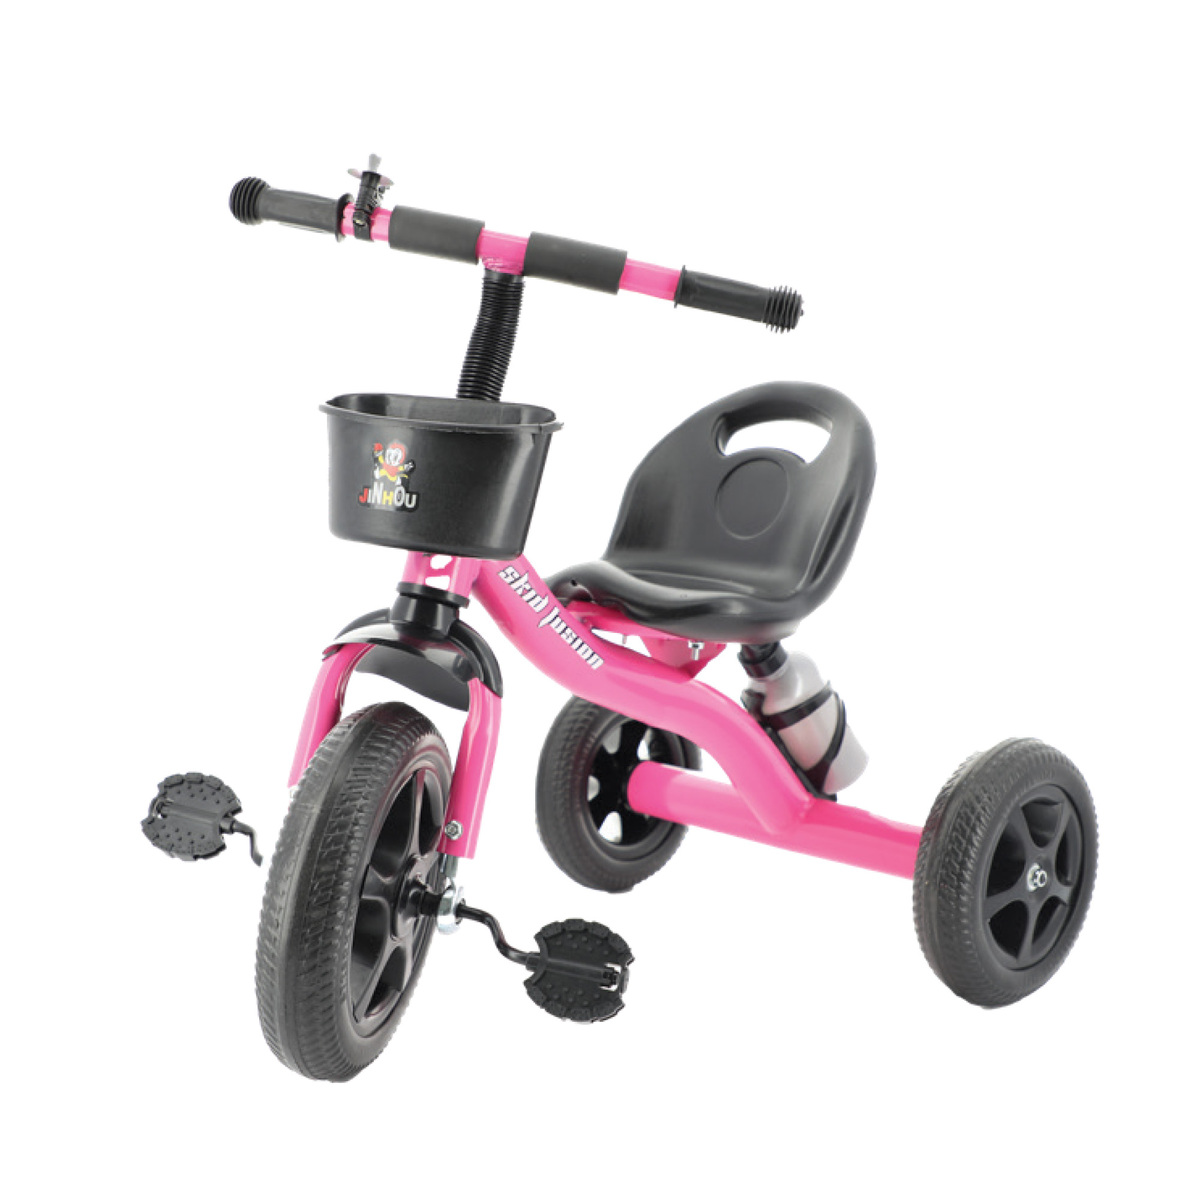 Skid Fusion Children Tricycle JH-678 Assorted